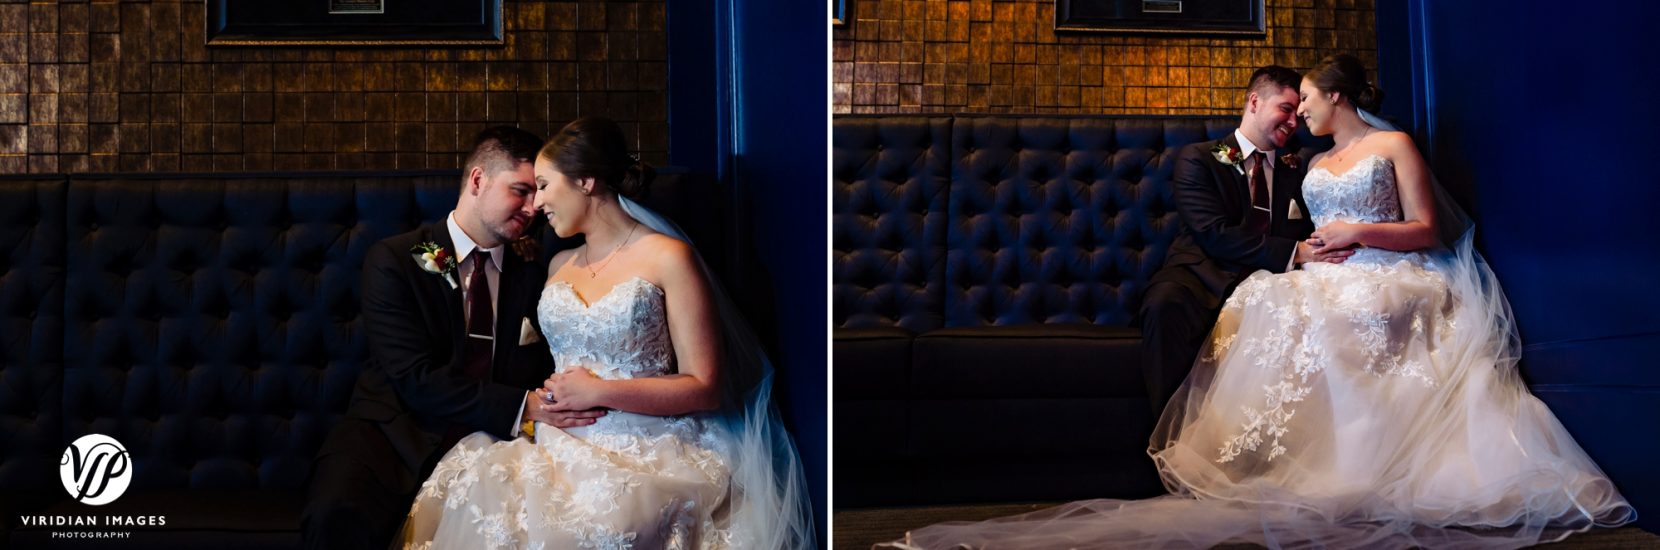 bride and groom portrait sitting on dark blue bench against copper wall